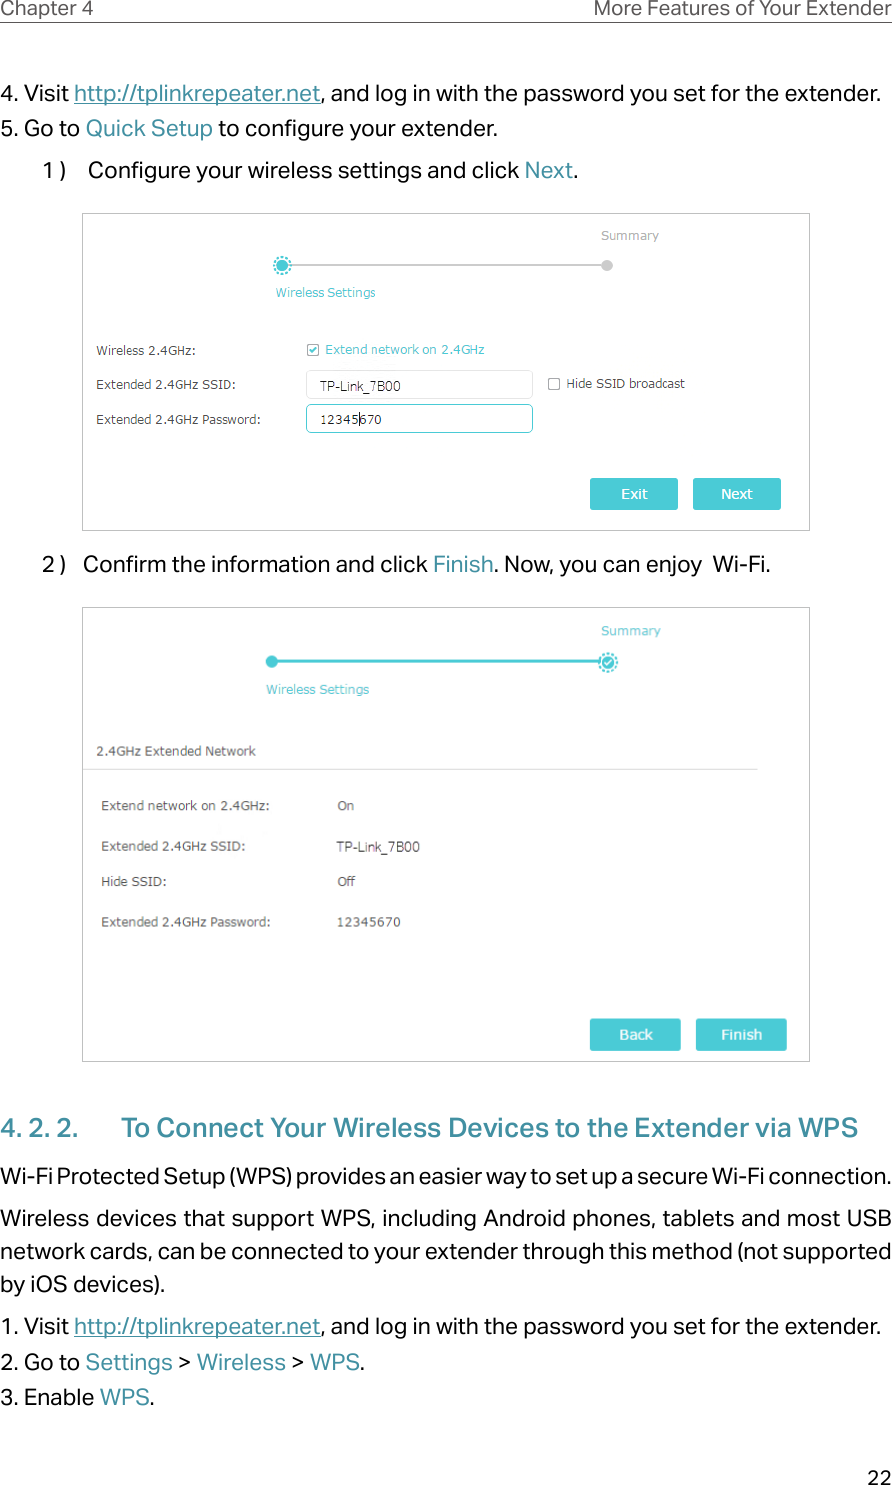 22Chapter 4 More Features of Your Extender4. Visit http://tplinkrepeater.net, and log in with the password you set for the extender.5. Go to Quick Setup to configure your extender.1 )   Configure your wireless settings and click Next.  2 )  Confirm the information and click Finish. Now, you can enjoy  Wi-Fi.4. 2. 2.  To Connect Your Wireless Devices to the Extender via WPSWi-Fi Protected Setup (WPS) provides an easier way to set up a secure Wi-Fi connection.Wireless devices that support WPS, including Android phones, tablets and most USB network cards, can be connected to your extender through this method (not supported by iOS devices).1. Visit http://tplinkrepeater.net, and log in with the password you set for the extender.2. Go to Settings &gt; Wireless &gt; WPS. 3. Enable WPS.